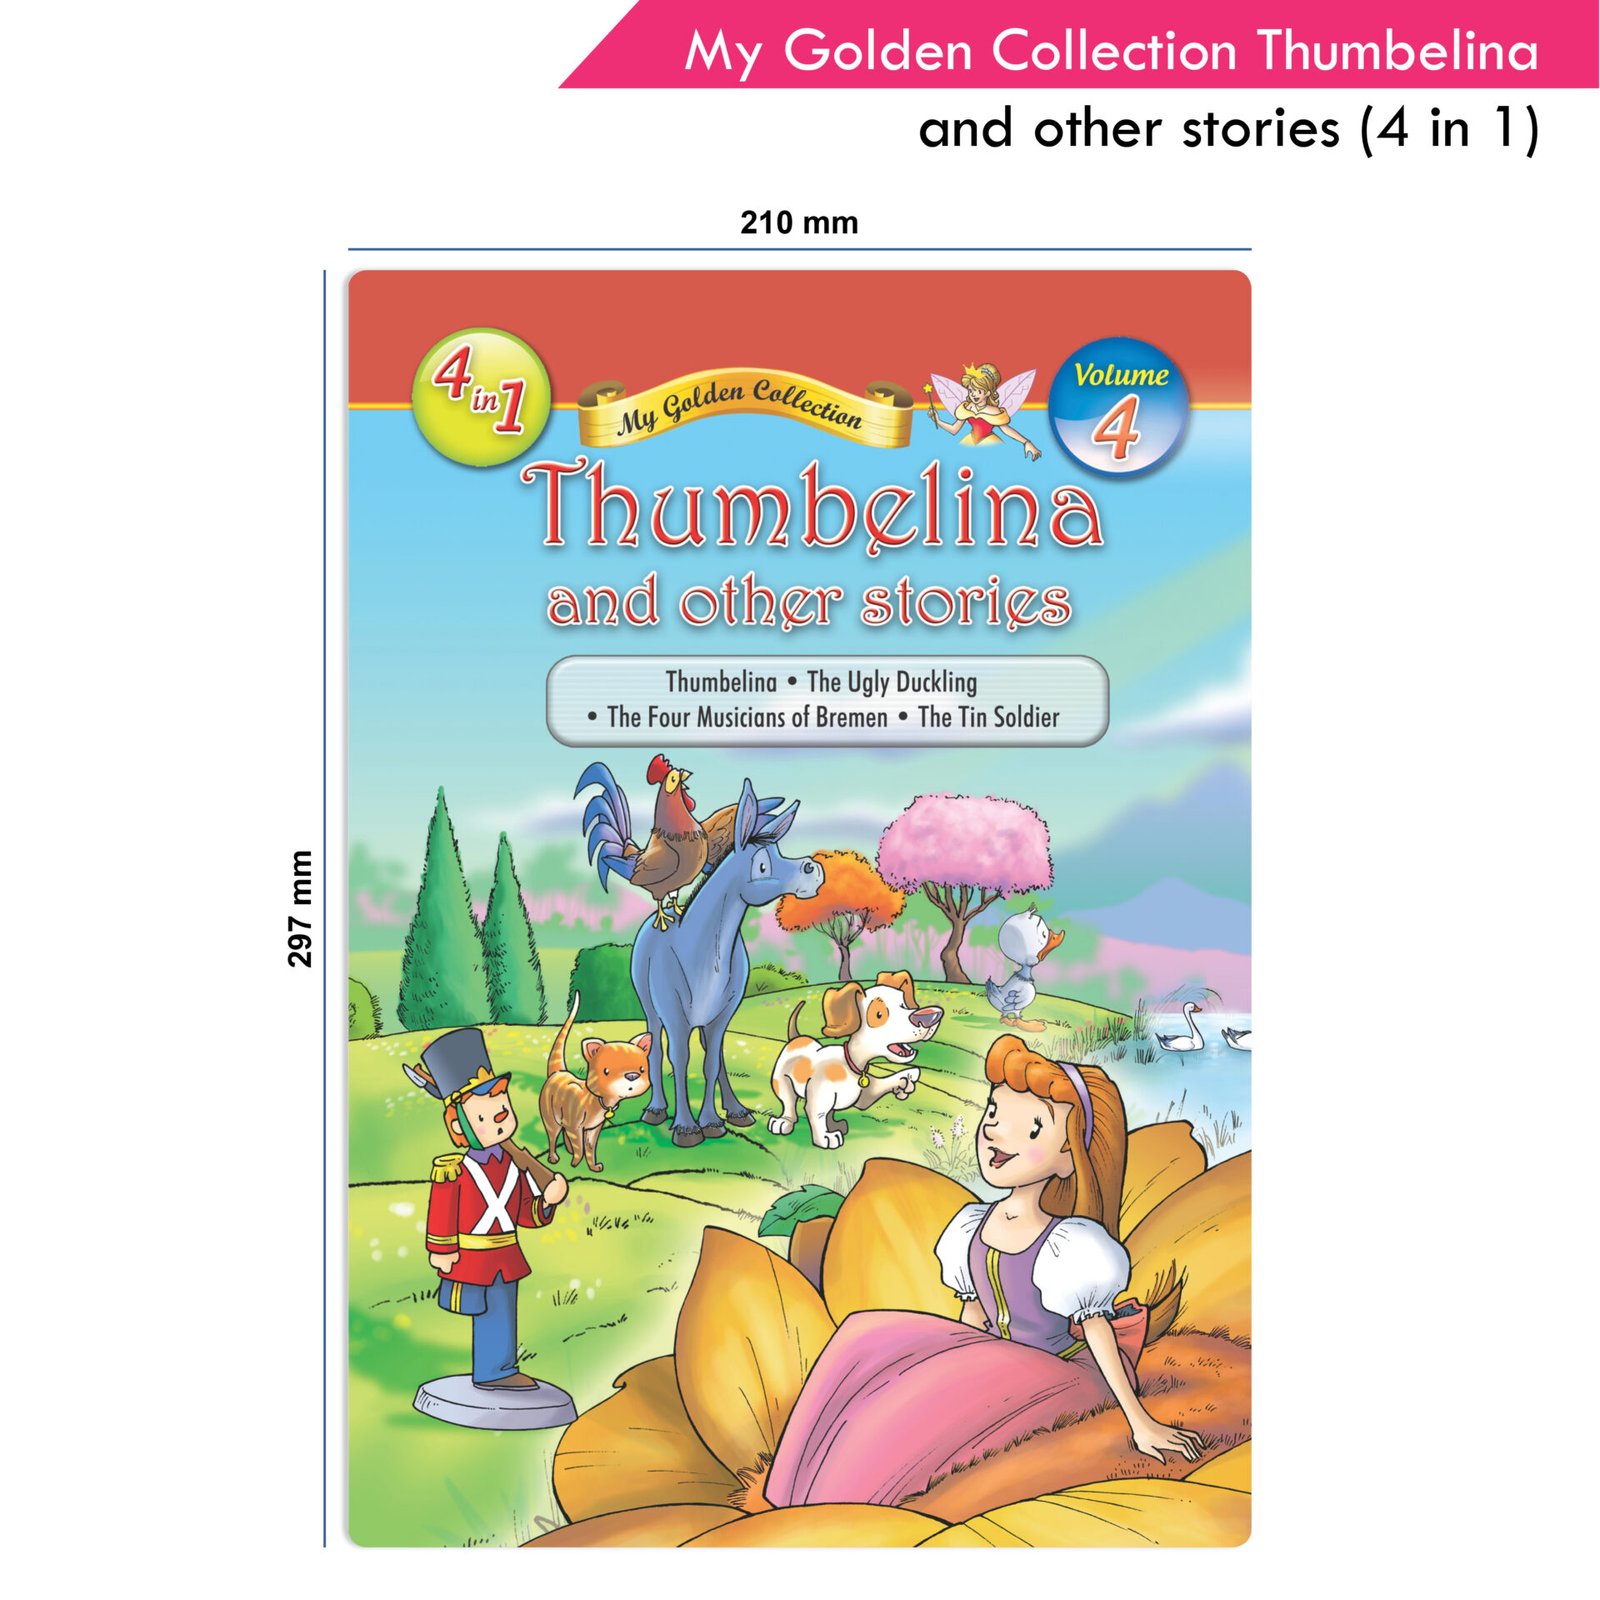 My Golden Collection Volume 4 Thumbelina and other Stories 2